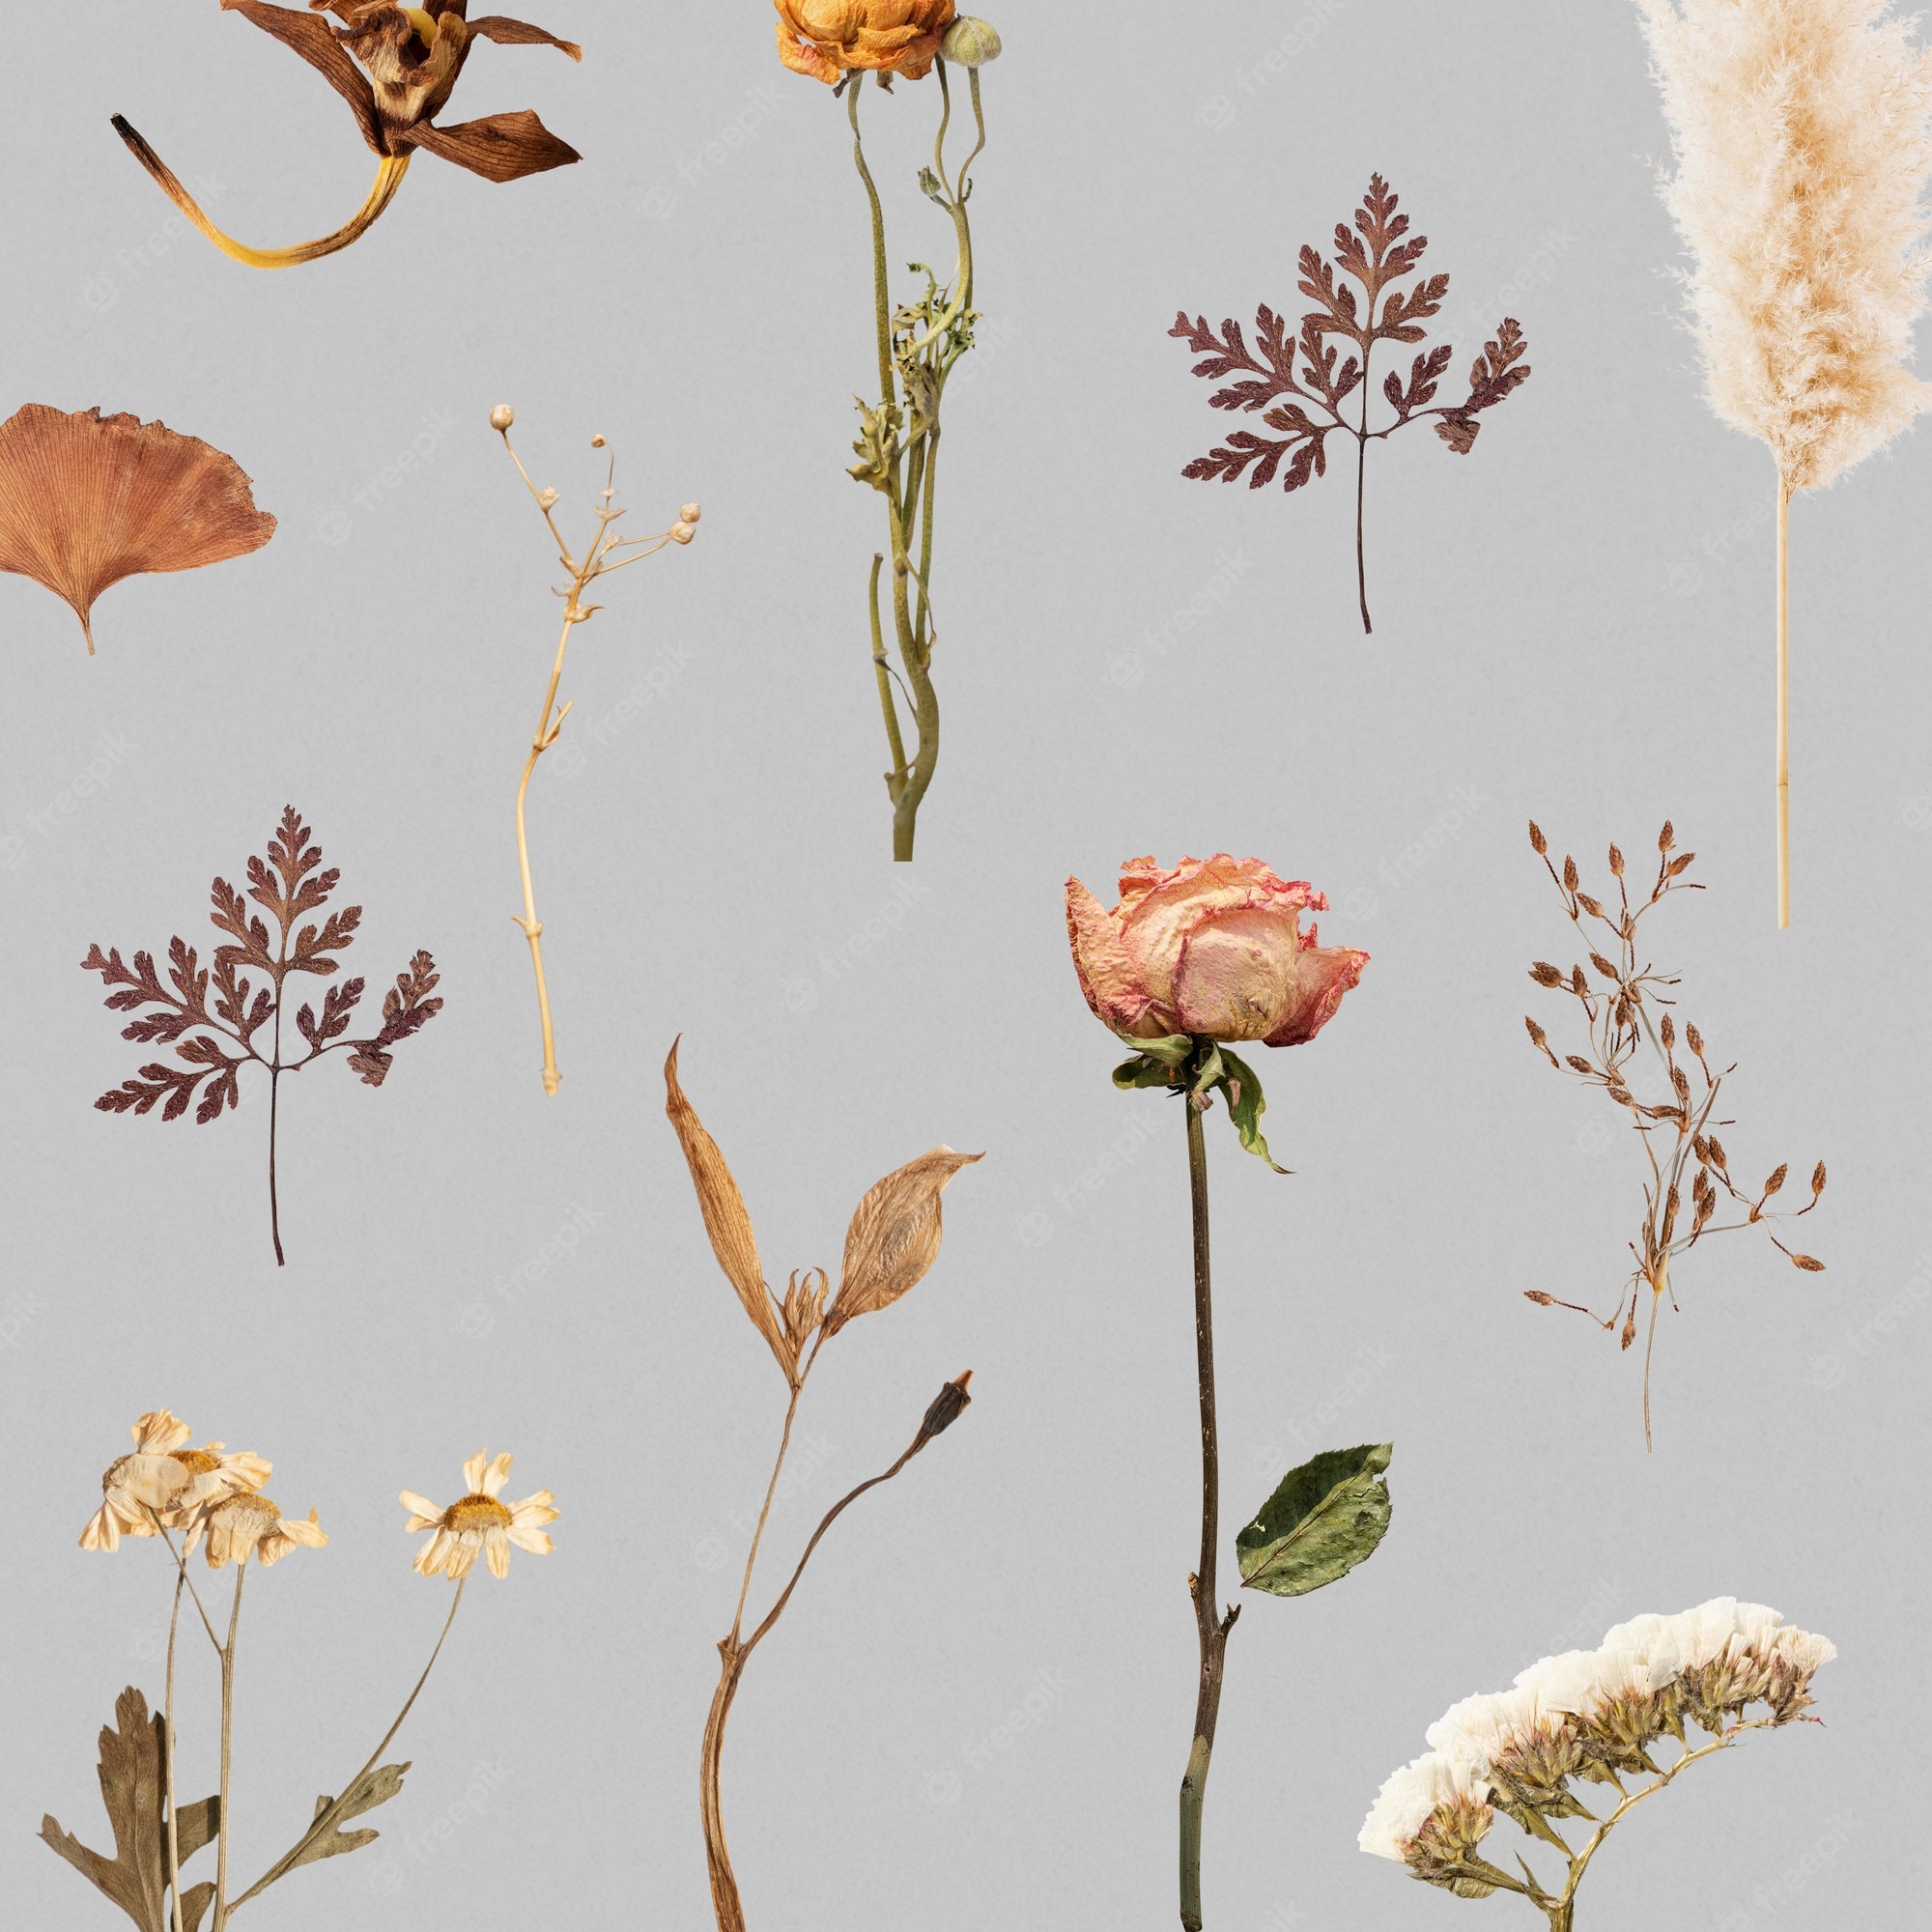 Dried Flowers Image. Free Vectors, & PSD